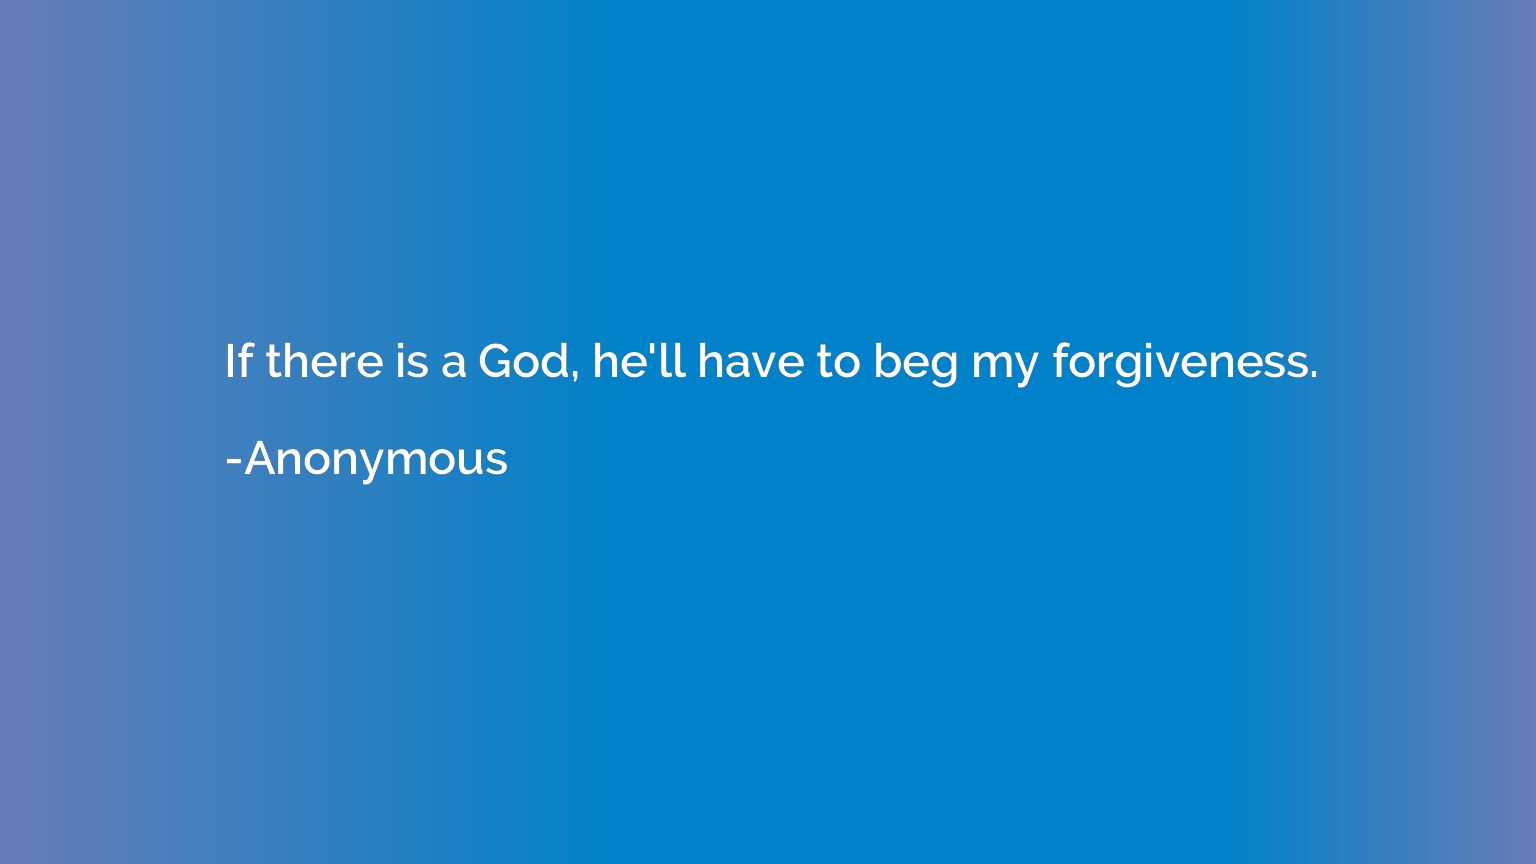 If there is a God, he'll have to beg my forgiveness.